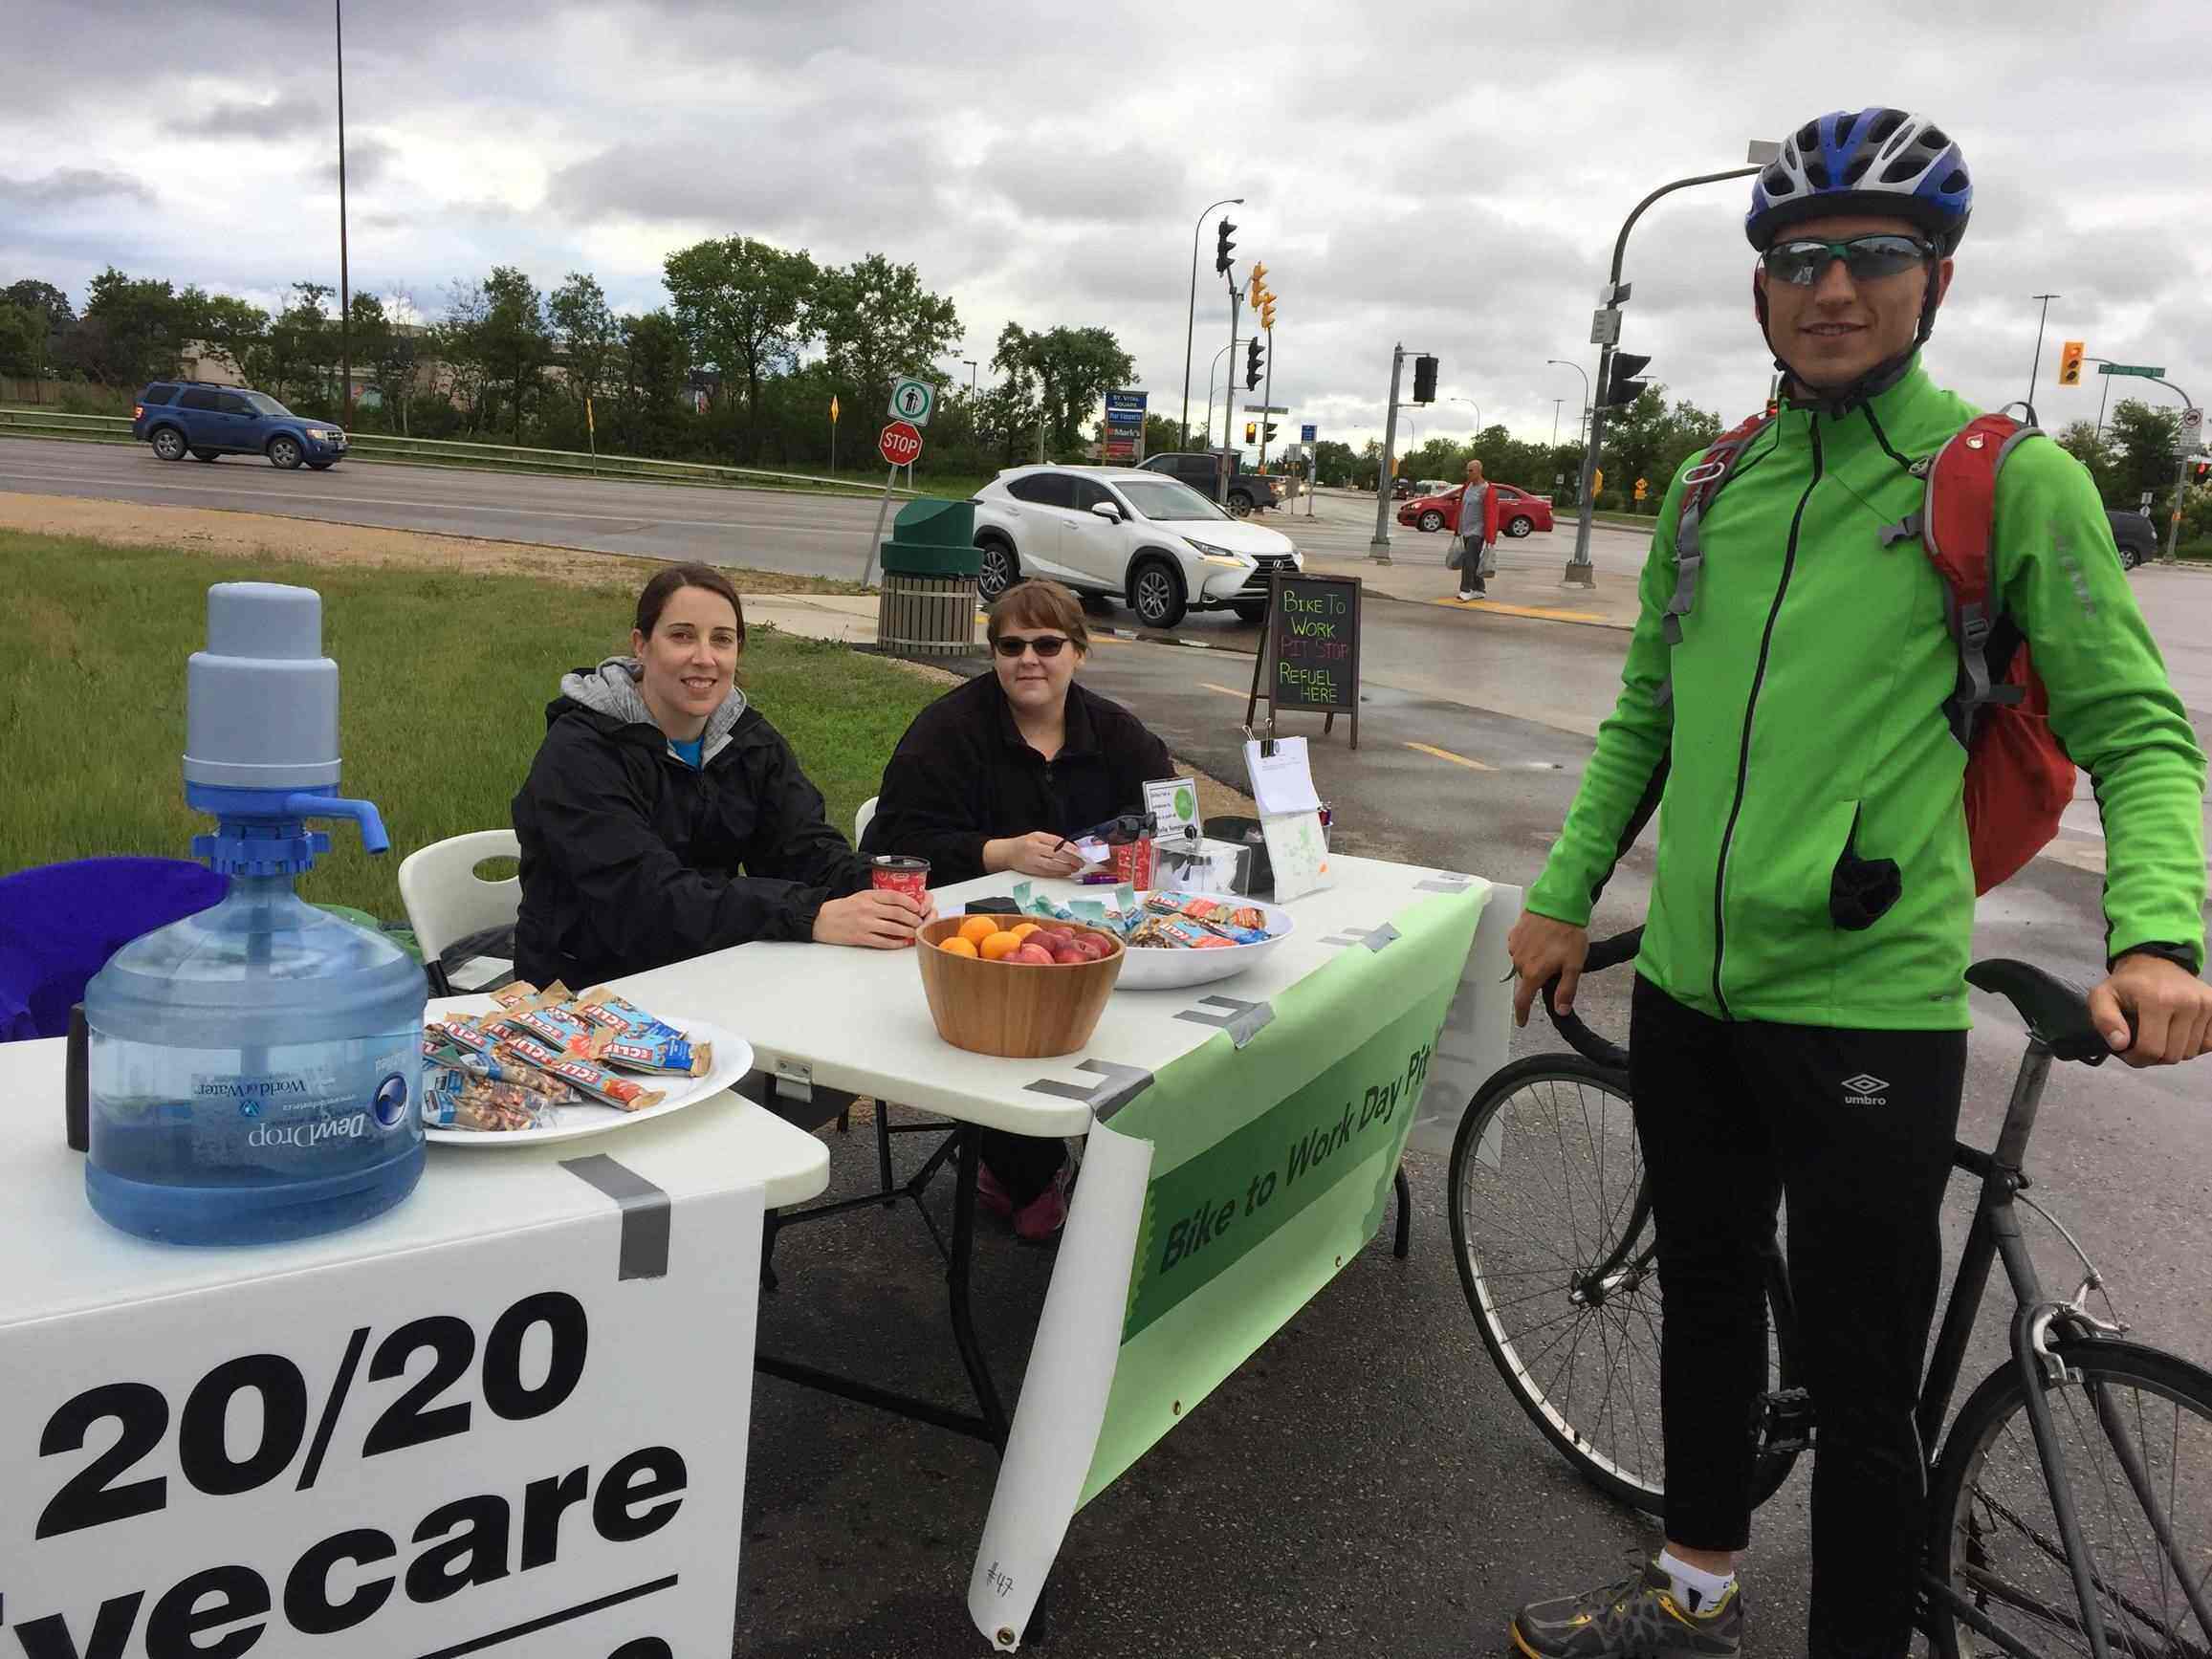 20/20 Staff posing with cyclist at pit stop table